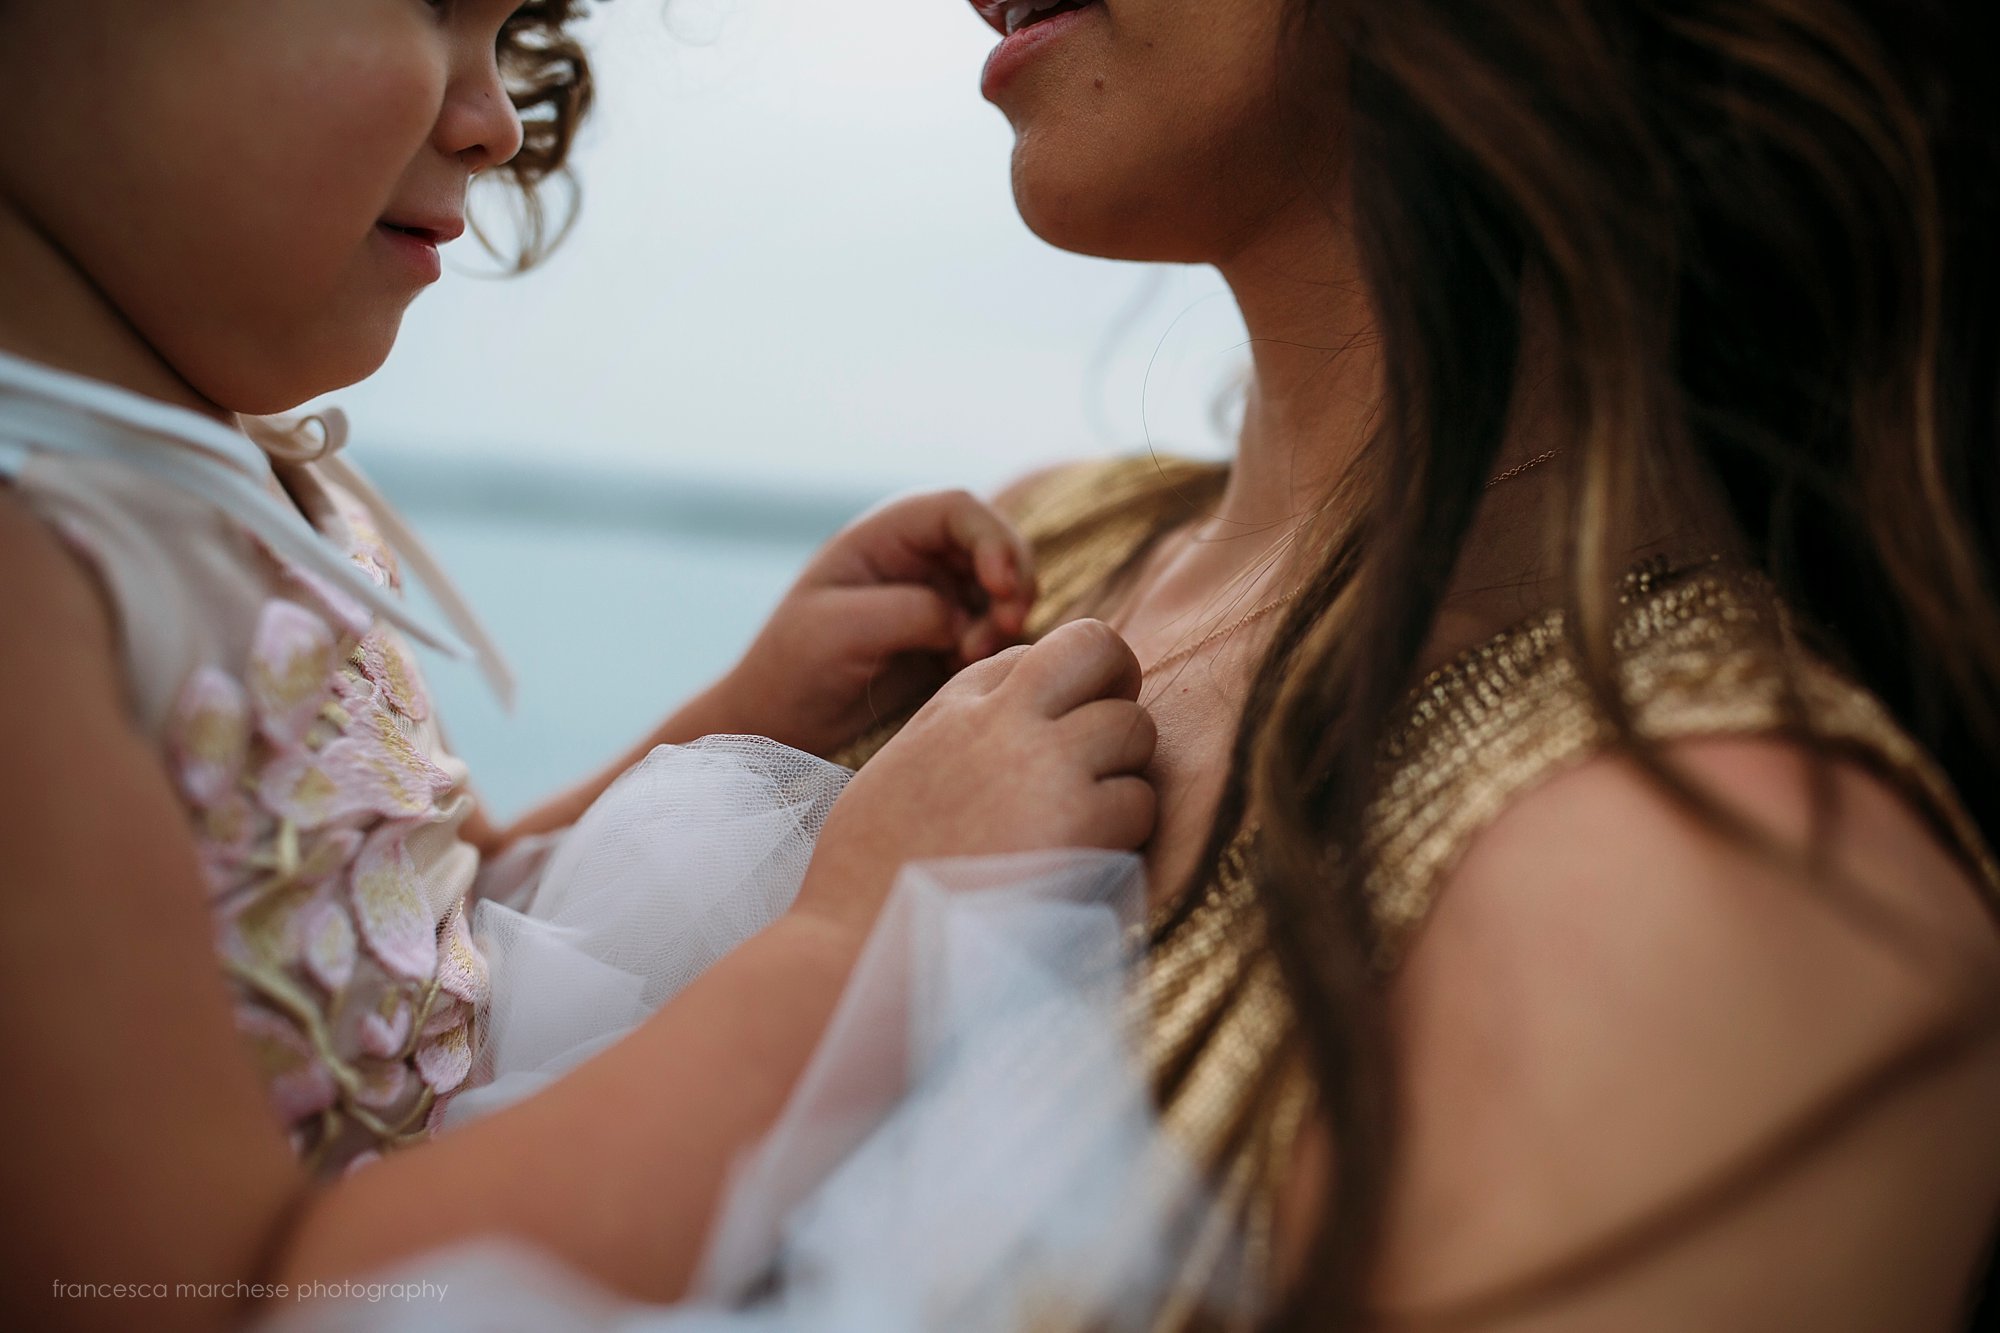 Francesca Marchese Photography - Family Photographer Starkman Family sunset beach session - mother and daughter details